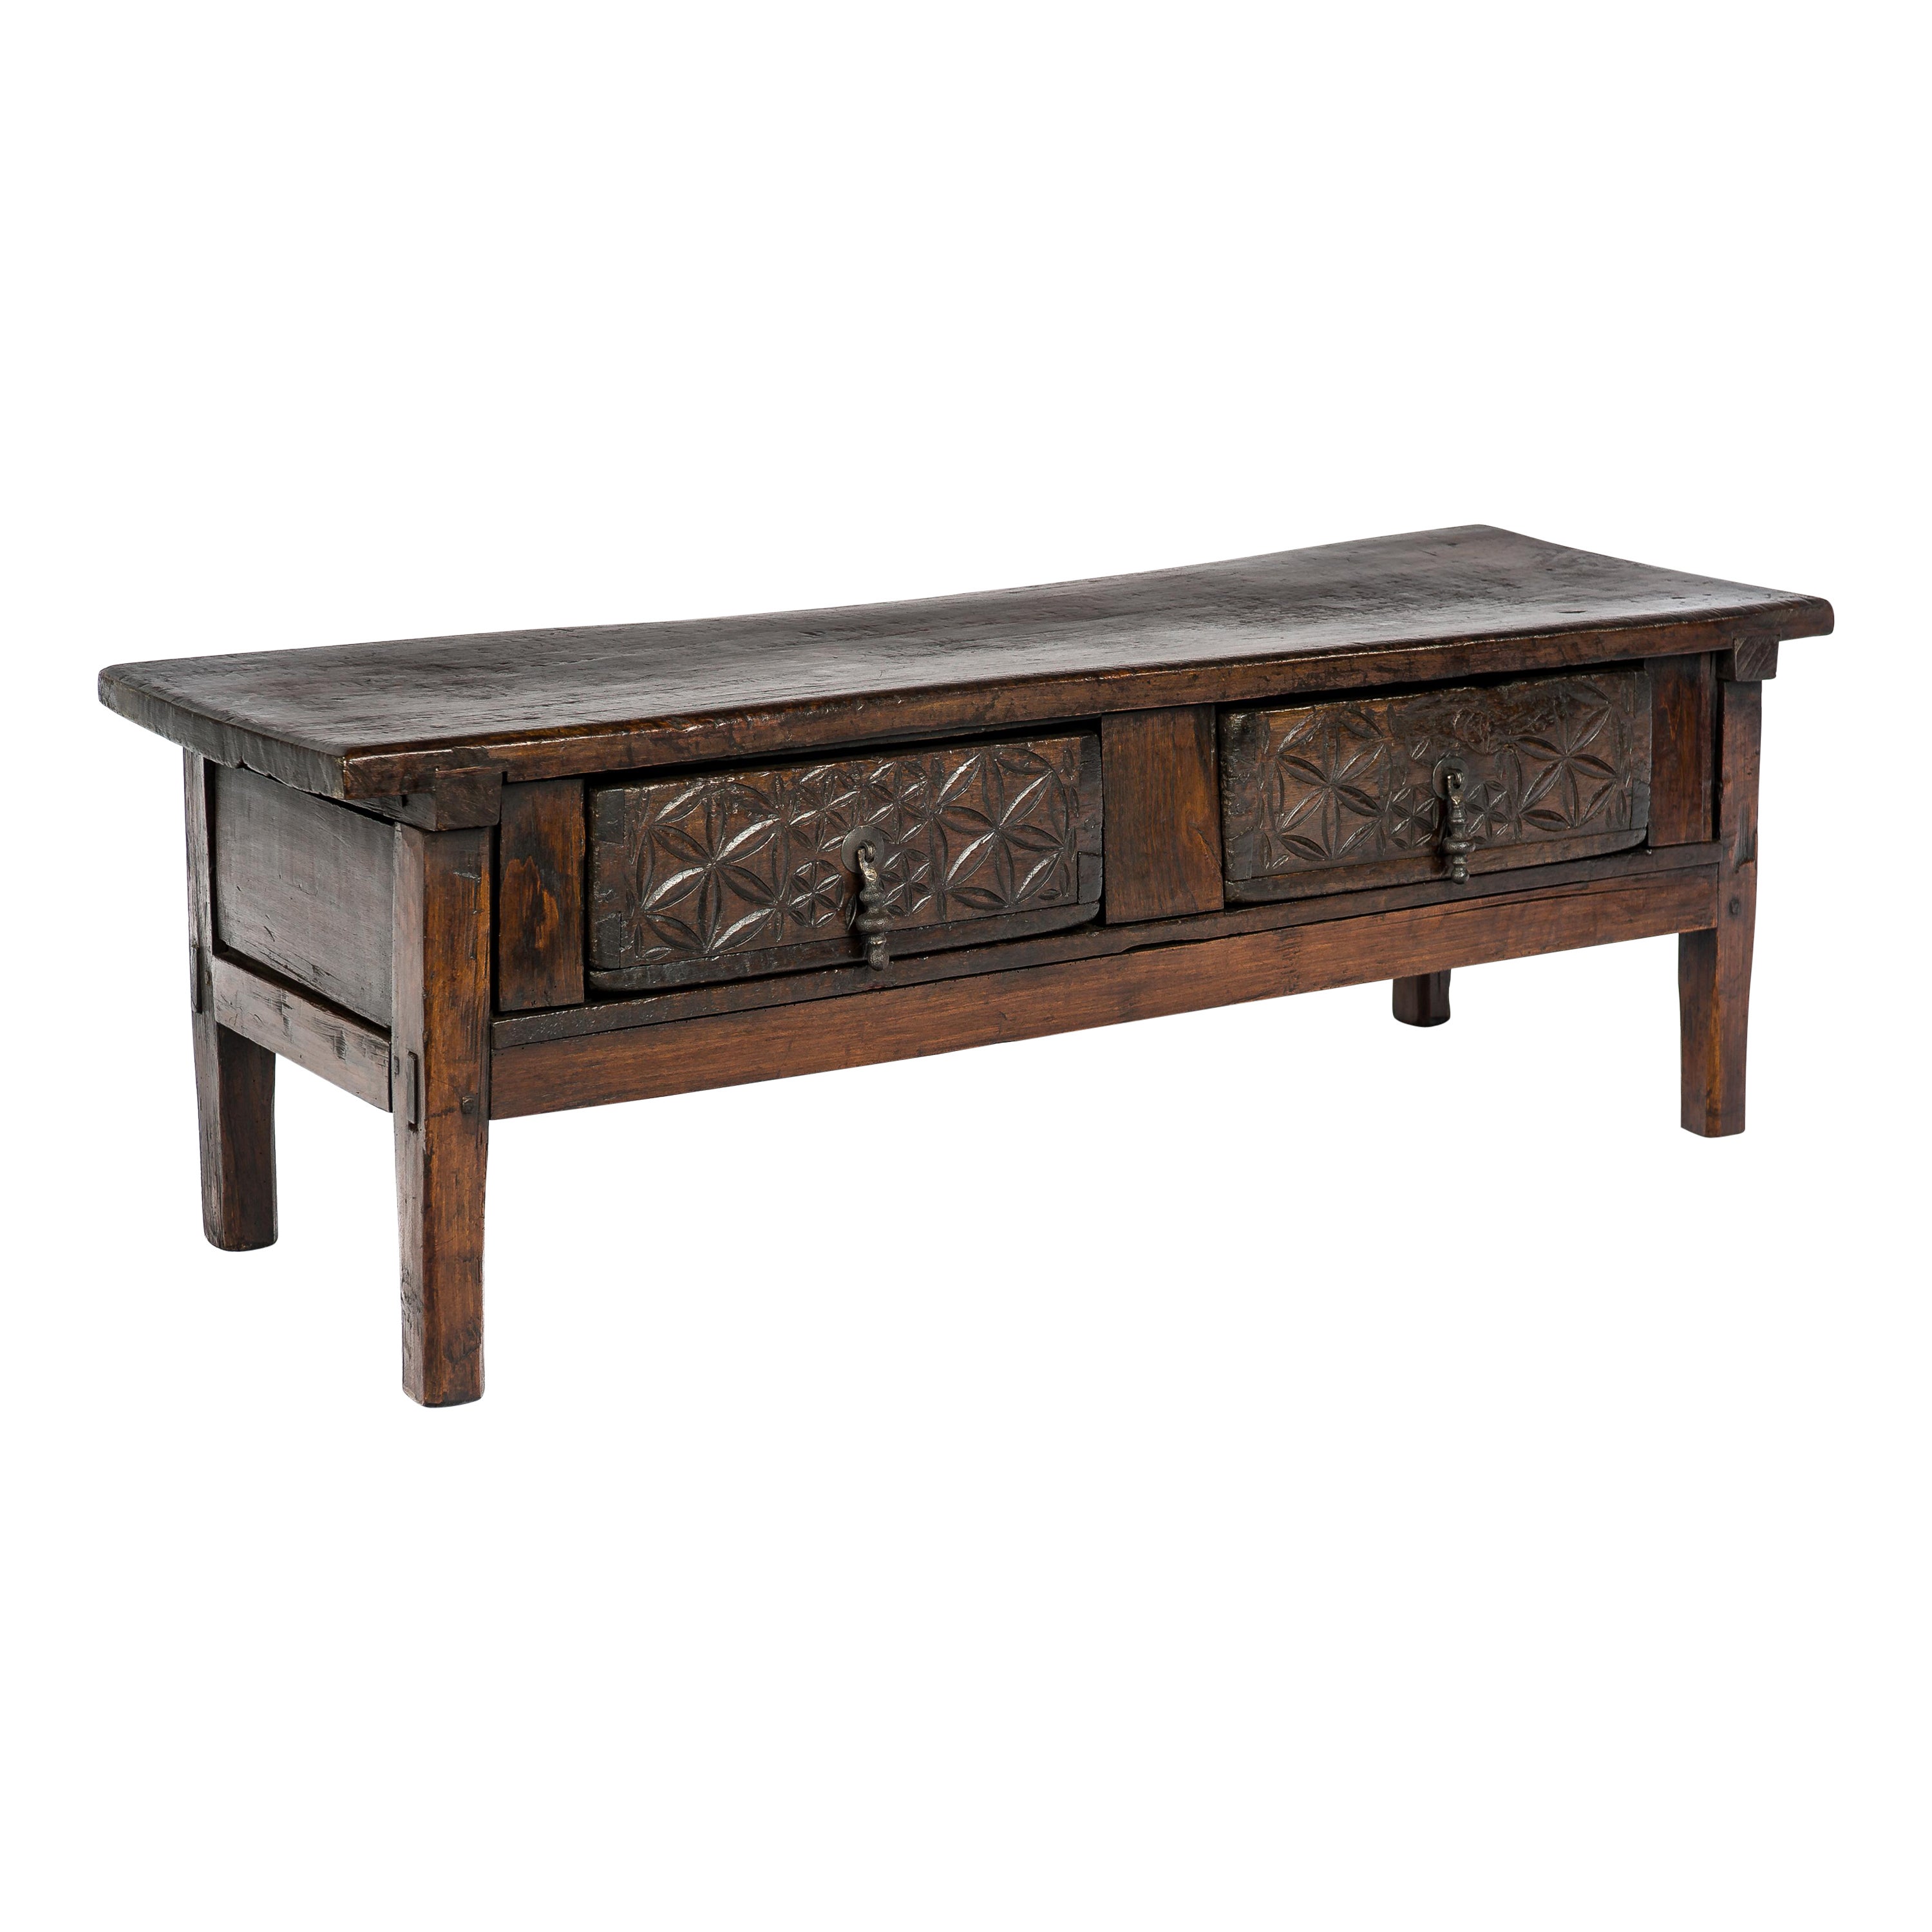 Antique 18th-Century Rustic Spanish Chestnut Coffee Table with Geometric Carving